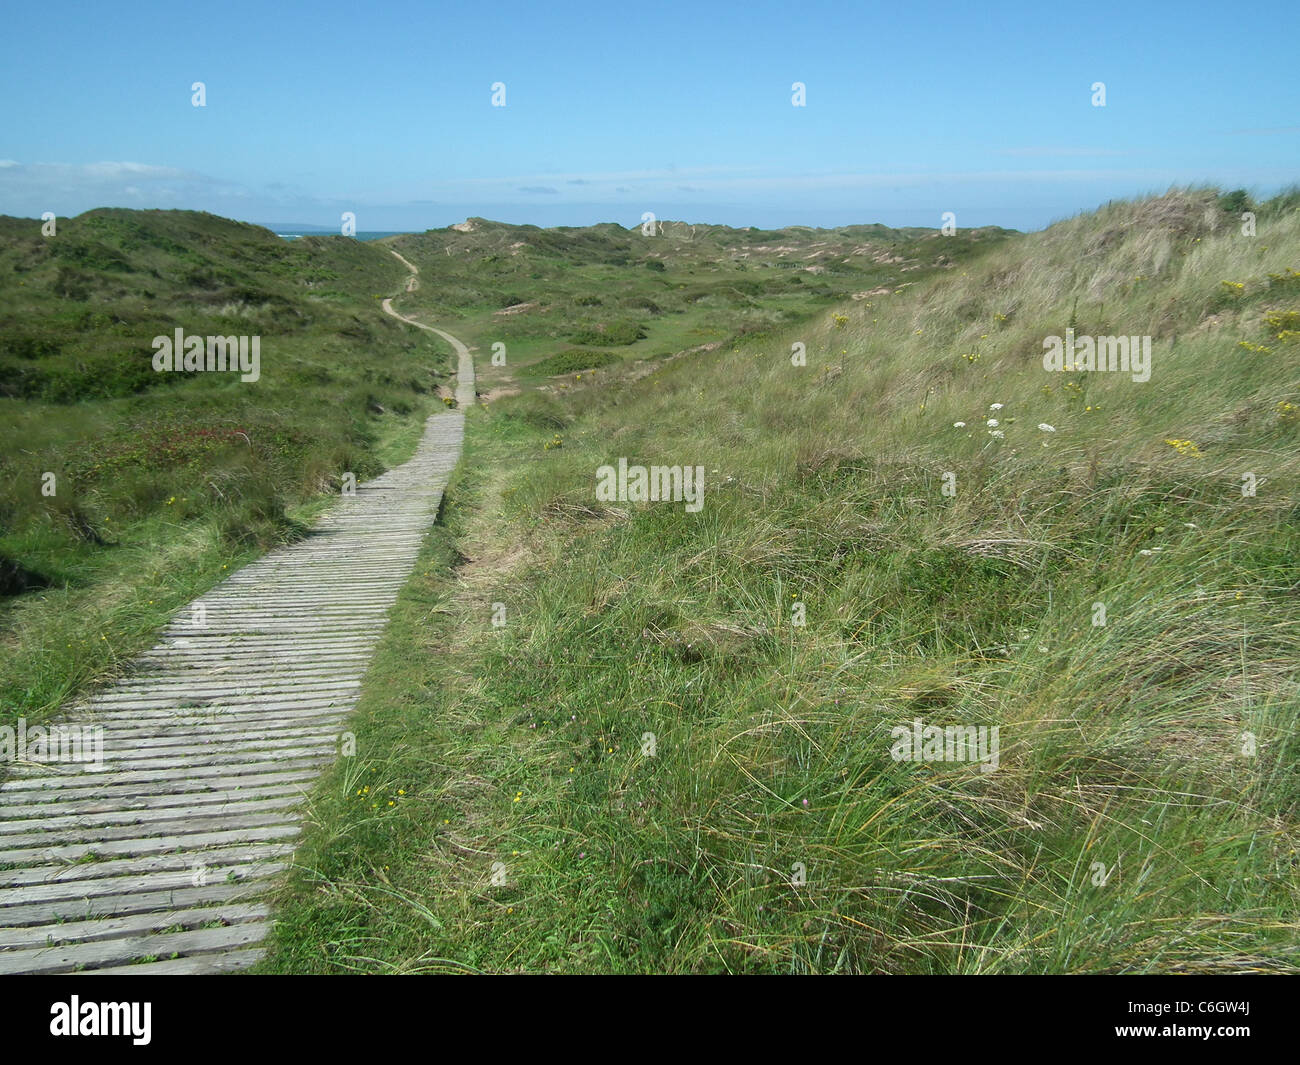 BRAUNTON BURROWS in north west Devon, England showing the boardwalk through the dune system. Photo Tony Gale Stock Photo